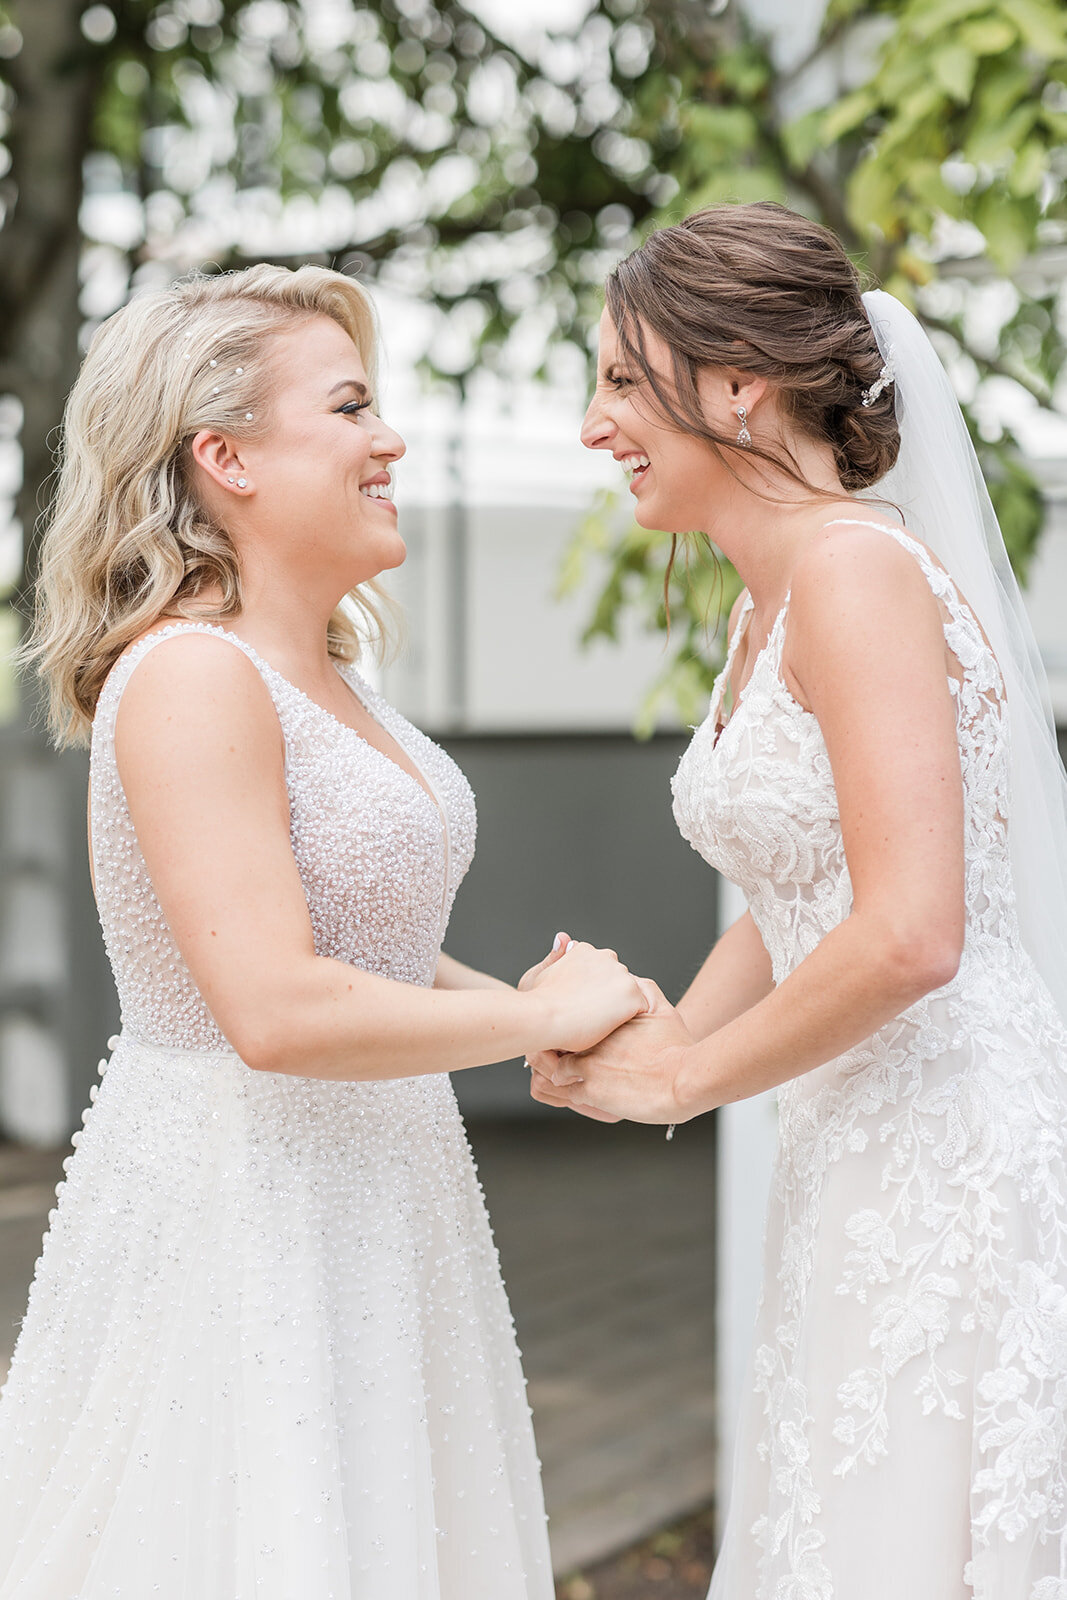 Katie and Colleen-206